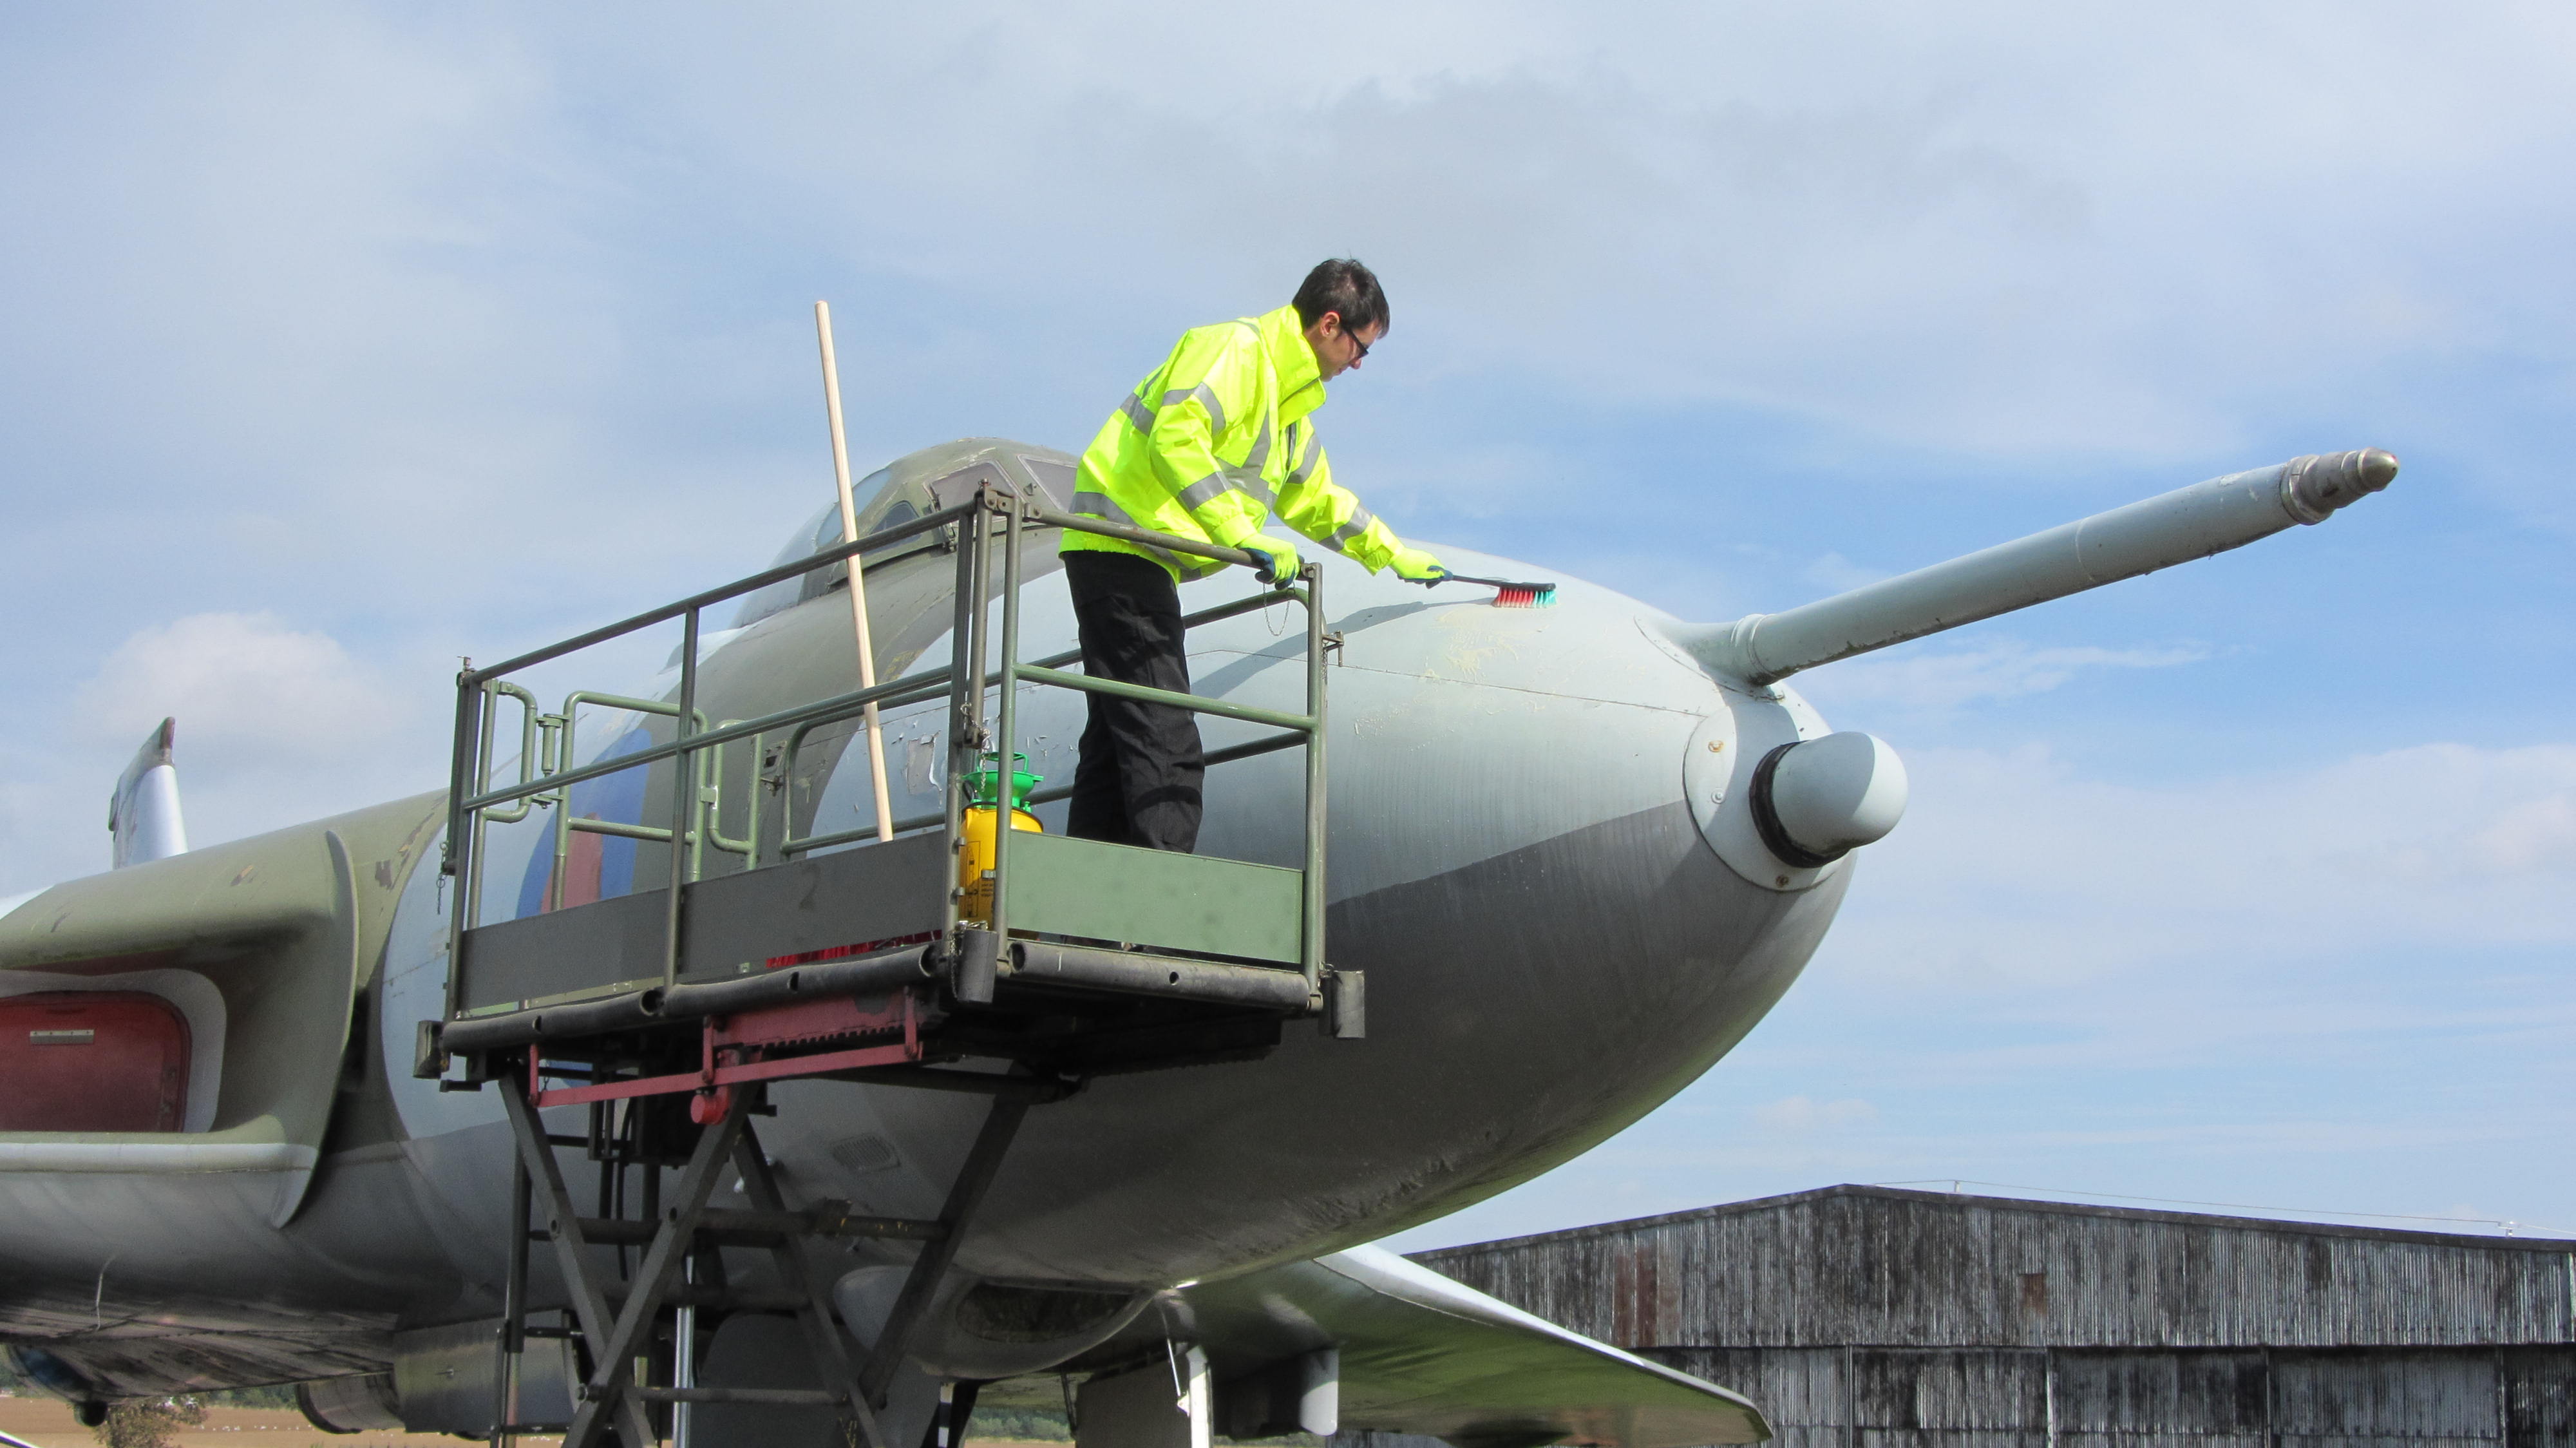 The Vulcan aircraft being cleaned at National Museum of Flight